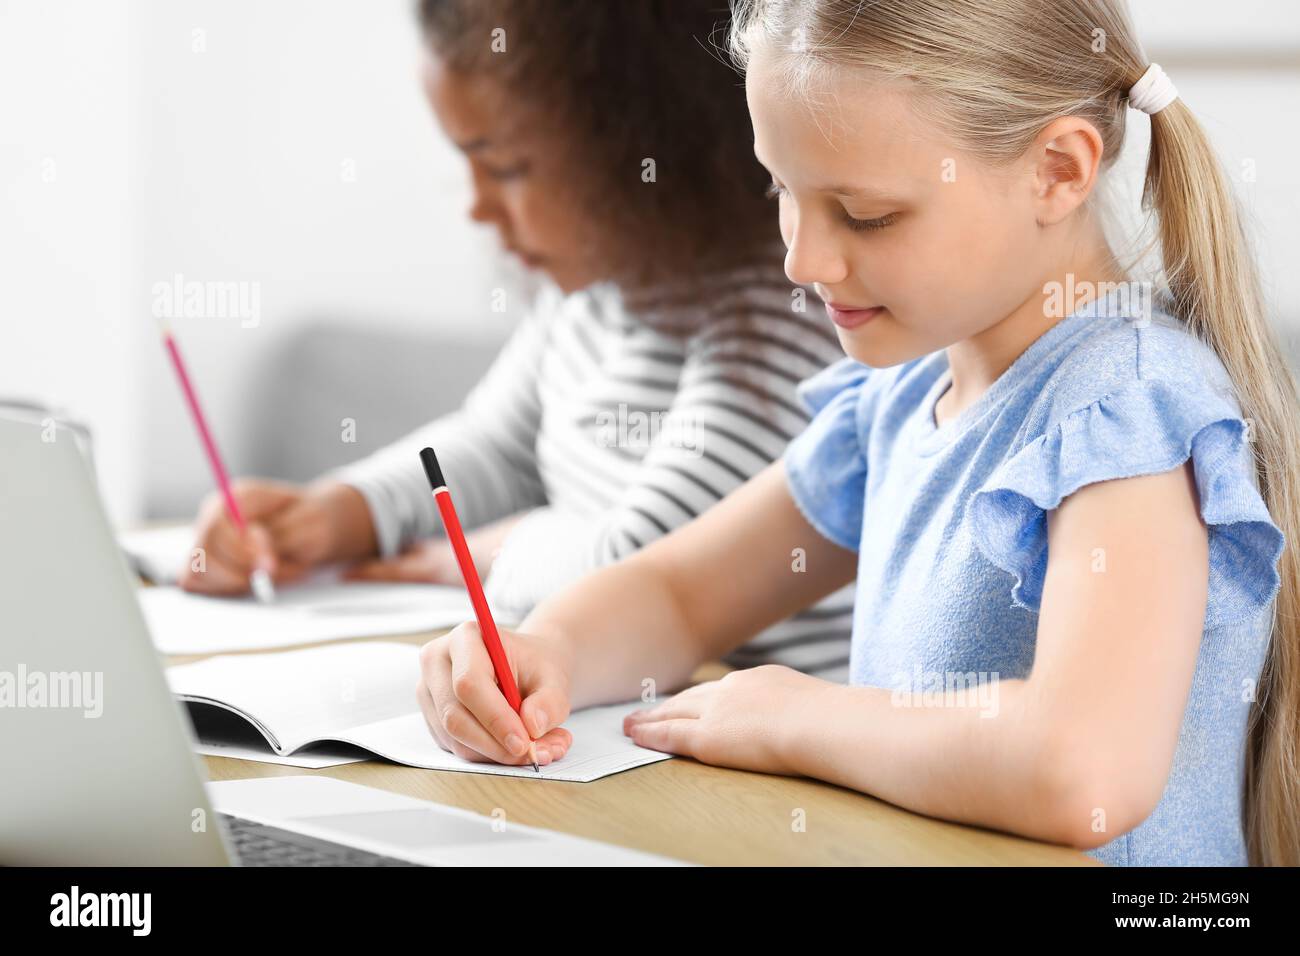 Little pupils studying online at home Stock Photo